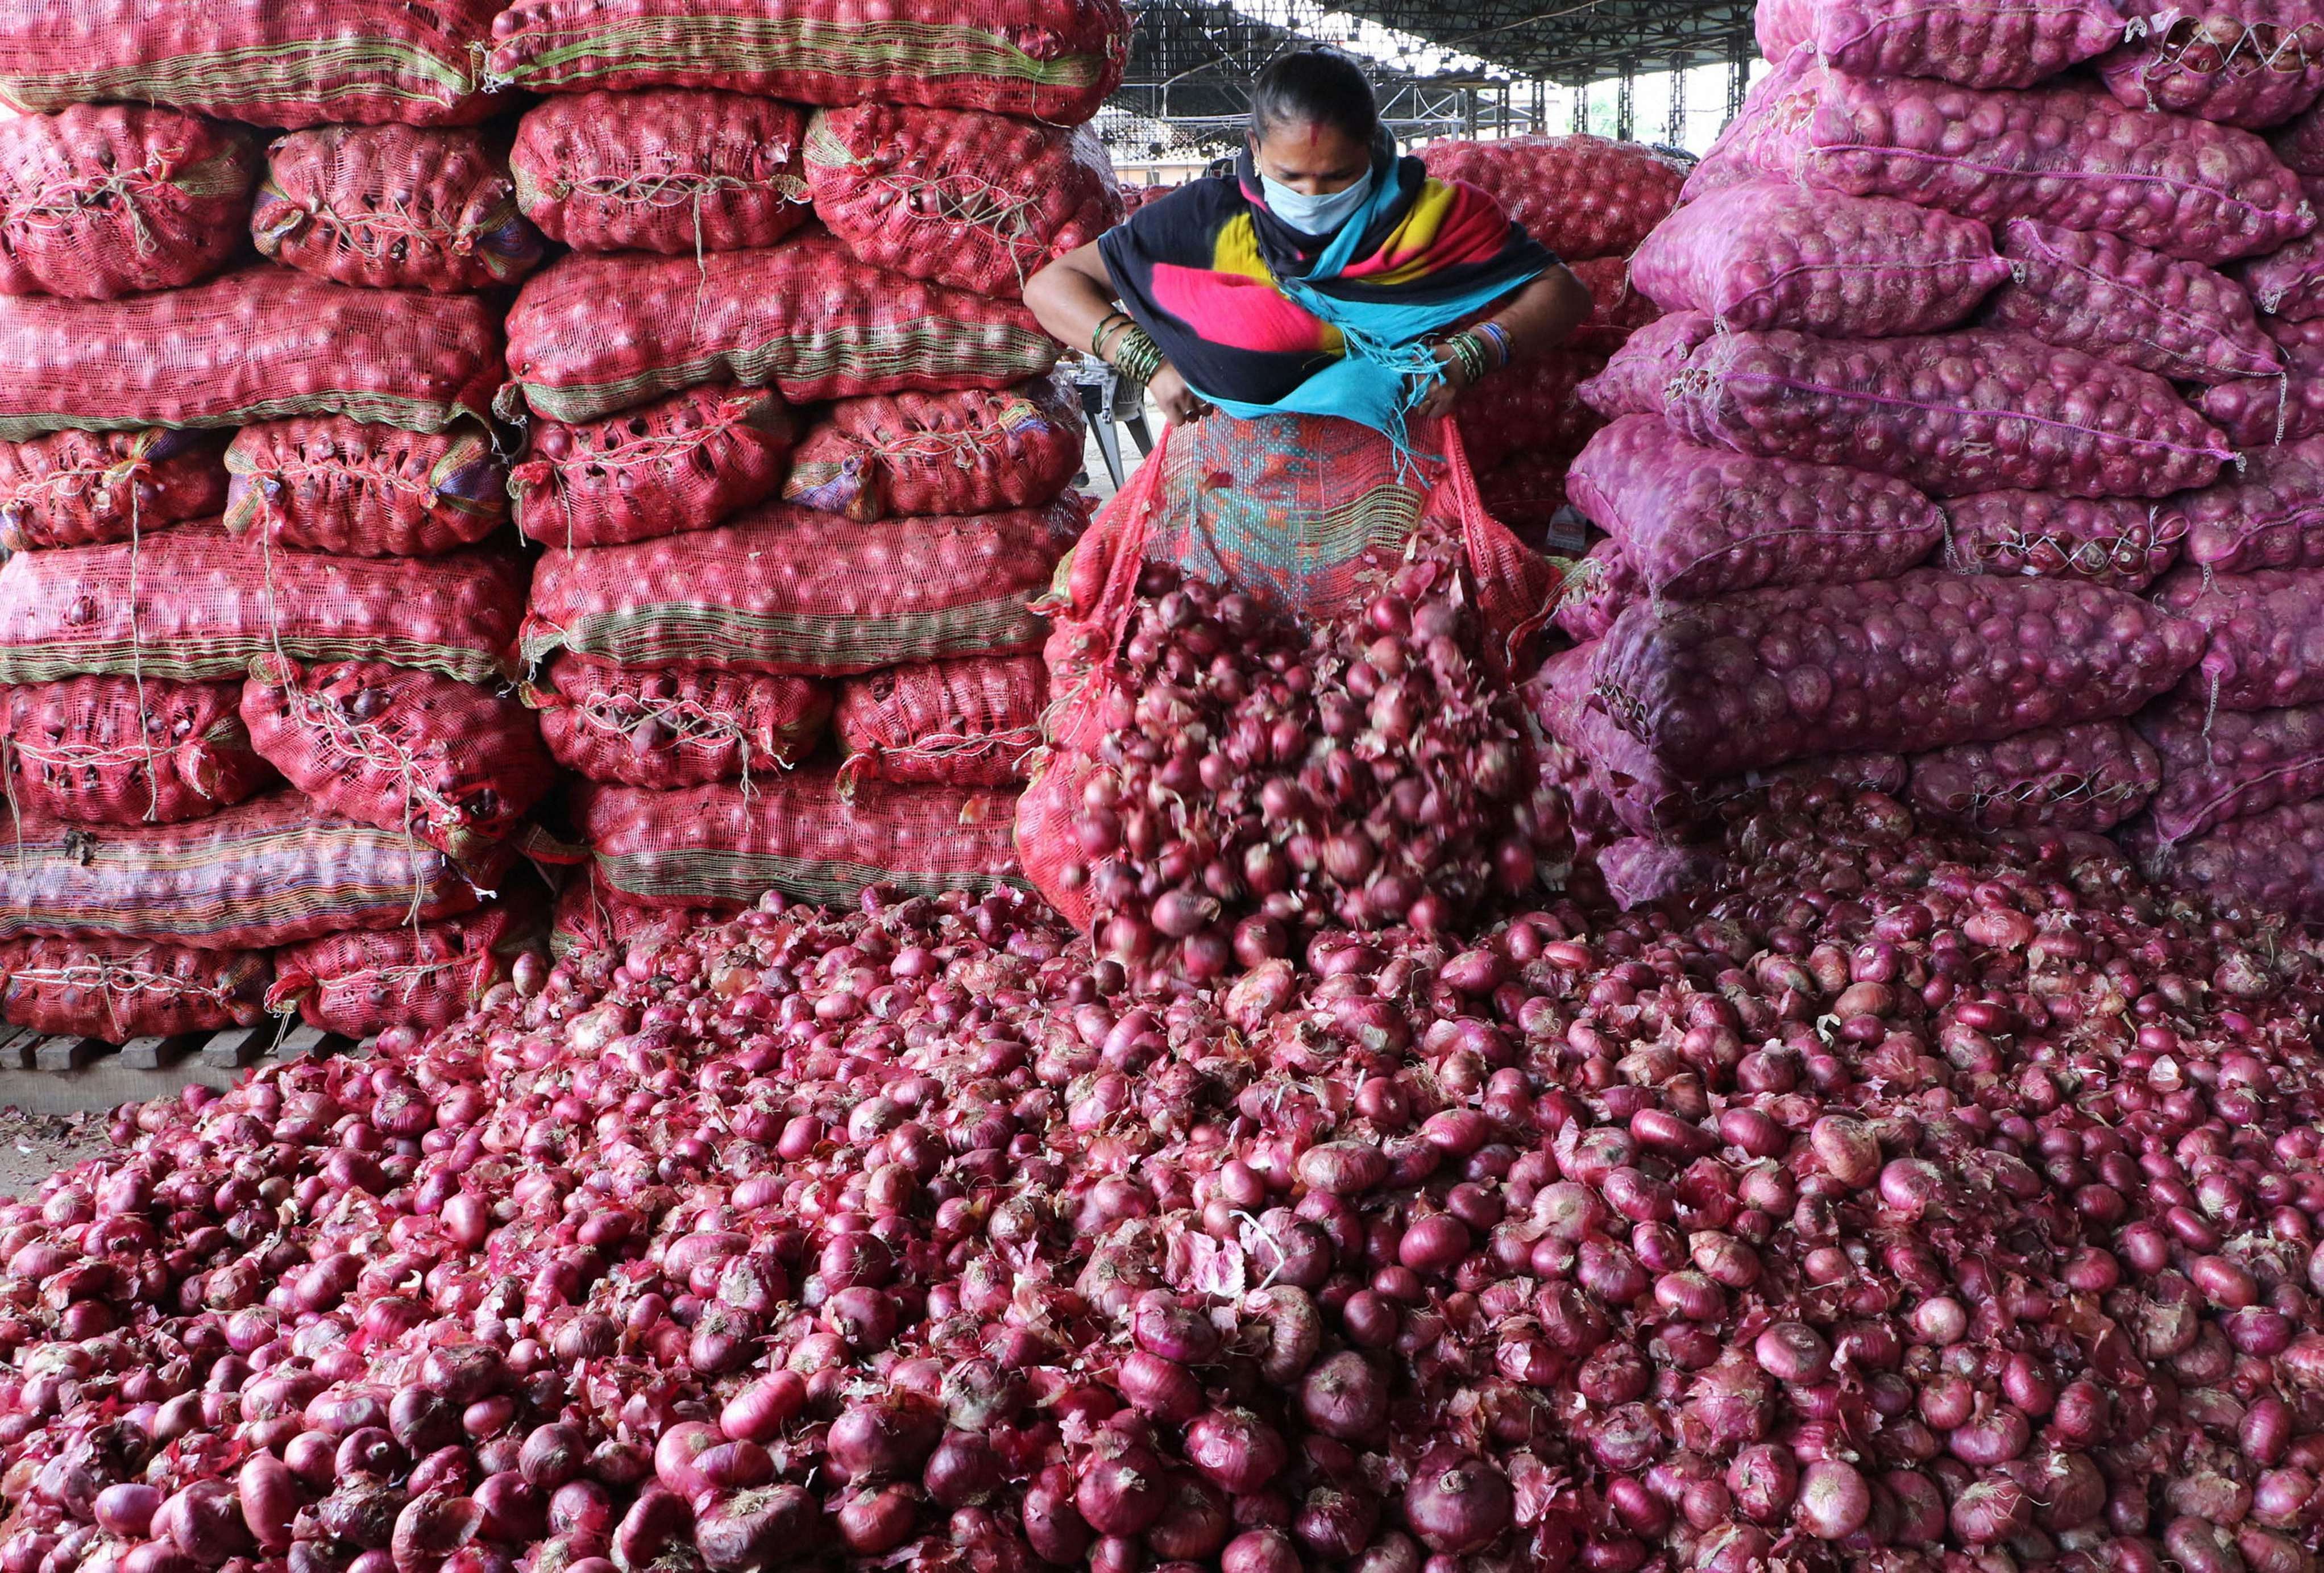 Imported onions were dispatched to states such as Andhra Pradesh, Kerala, Telangana, Chandigarh, Uttar Pradesh, Assam, Uttrakhand, Himachal Pradesh, West Bengal, and Goa among others.(PTI photo)